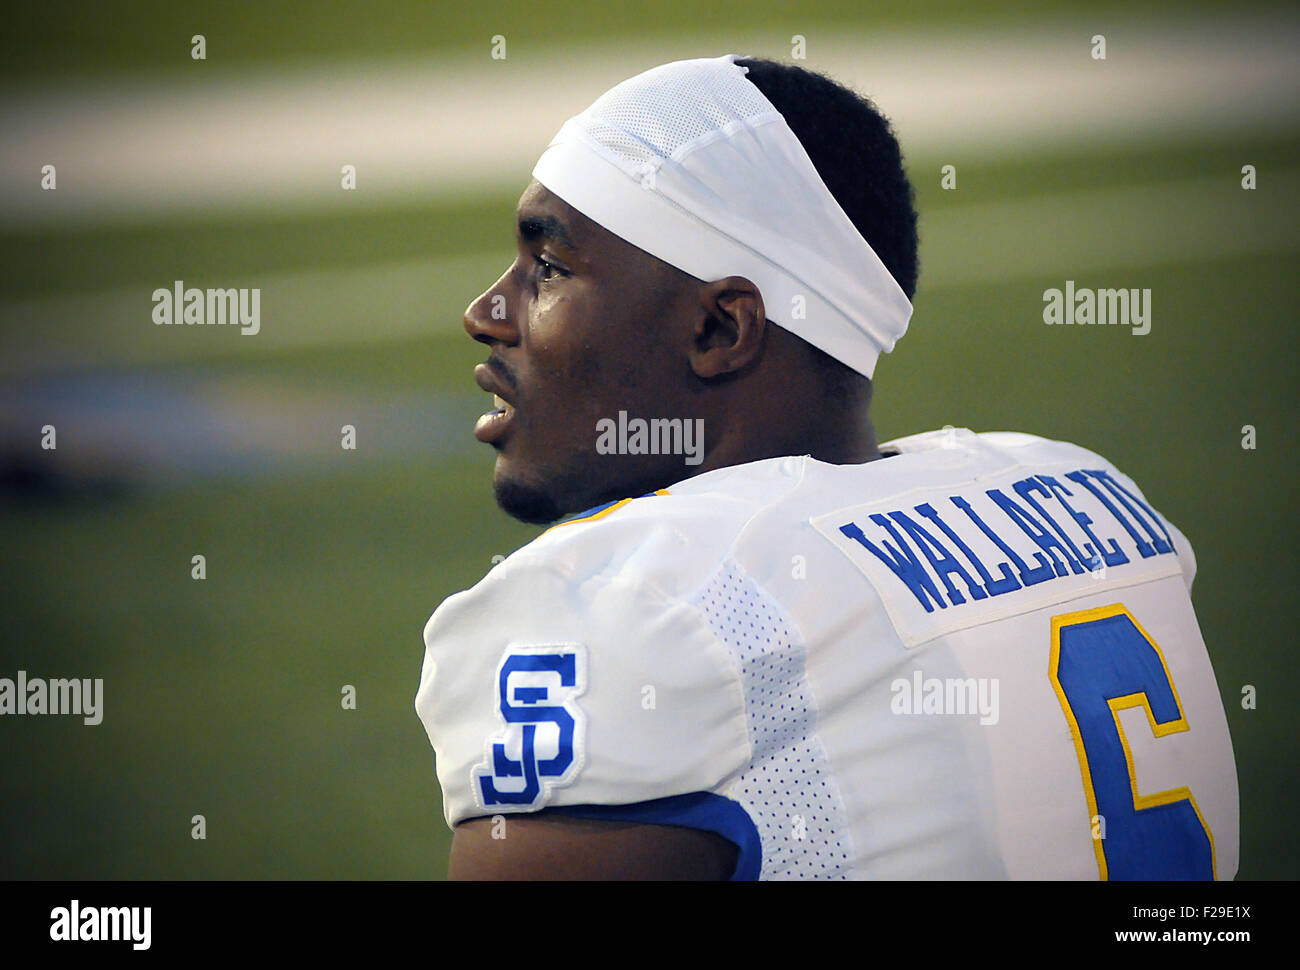 Colorado Springs, Colorado, USA. 12th Sep, 2015. San Jose State's, Cleveland Wallace, III, prior to Mountain West Conference action between the San Jose State Spartans and the Air Force Academy Falcons at Falcon Stadium, U.S. Air Force Academy, Colorado Springs, Colorado. Air Force defeats San Jose State 37-16. © csm/Alamy Live News Stock Photo